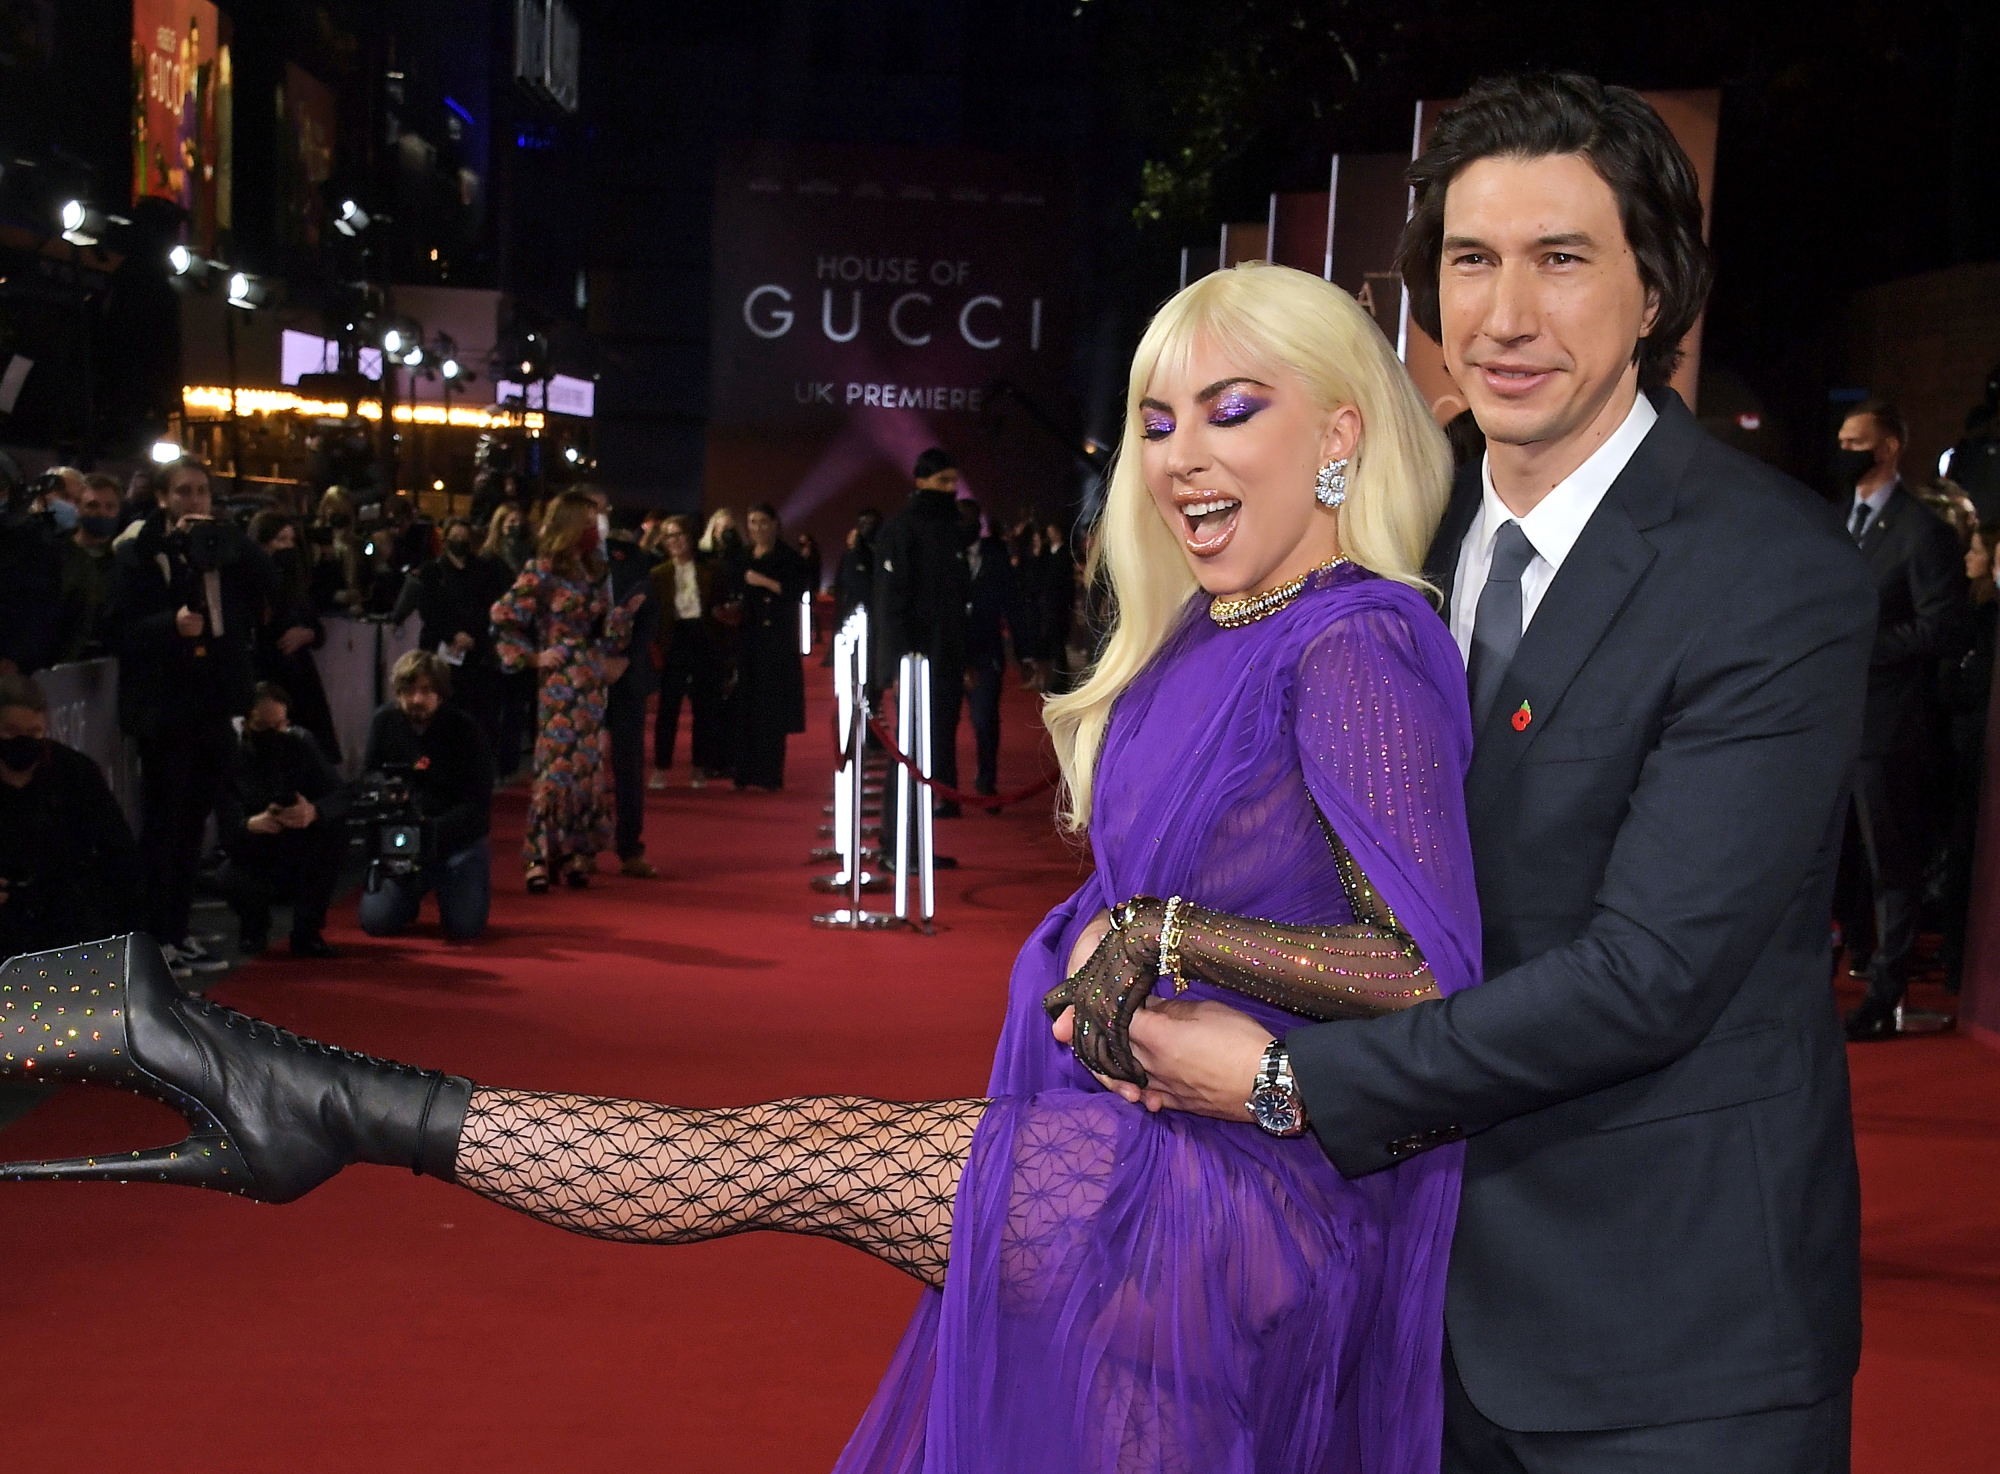 'House of Gucci' sex scene co-stars Lady Gaga and Adam Driver holding each other with Lady Gaga kicking her leg out